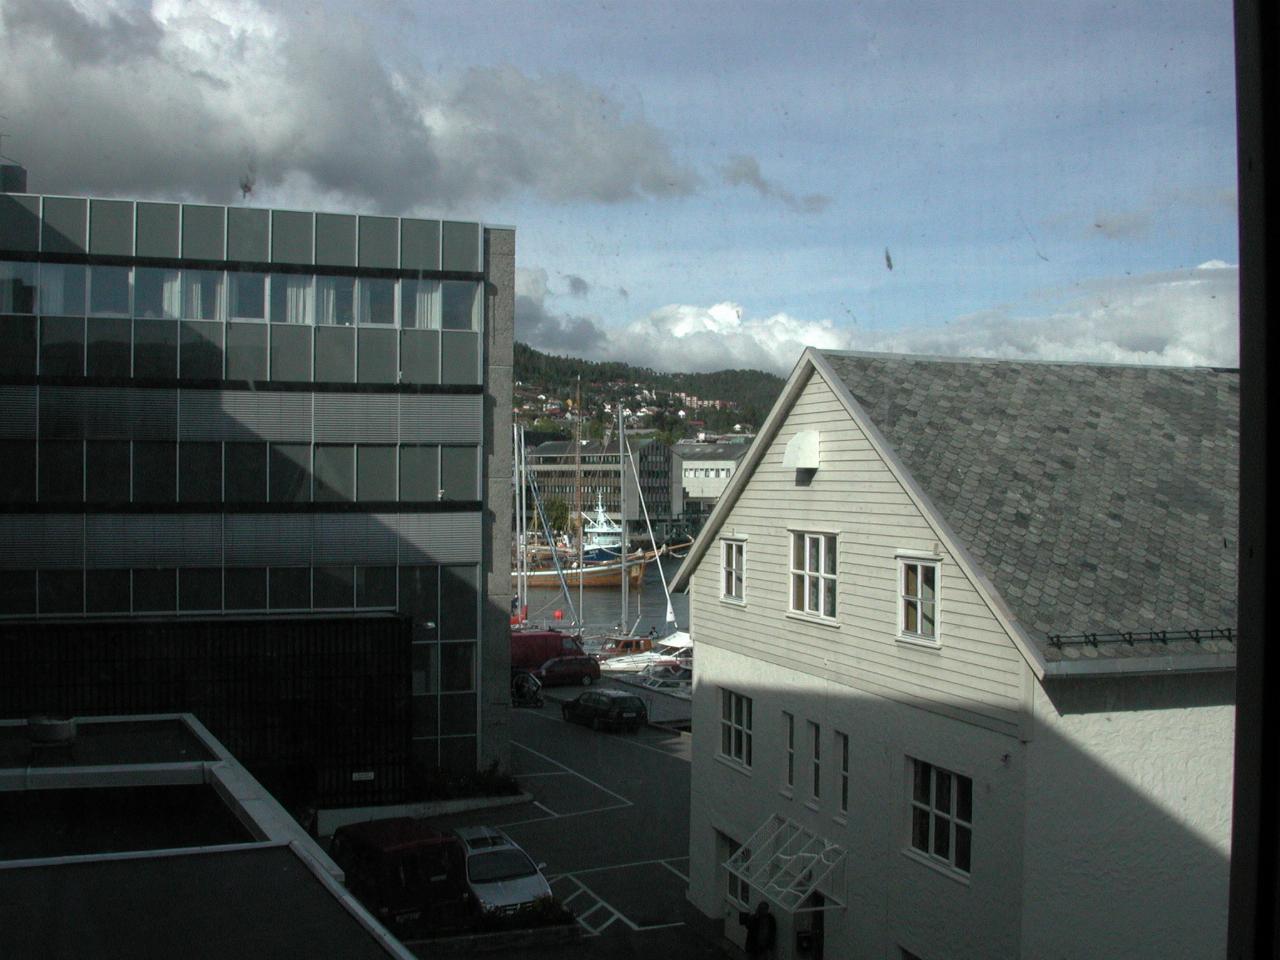 KPLU Viking Jazz: View from my room in the Rainbow Moldefjord Hotel in Molde, Norway.